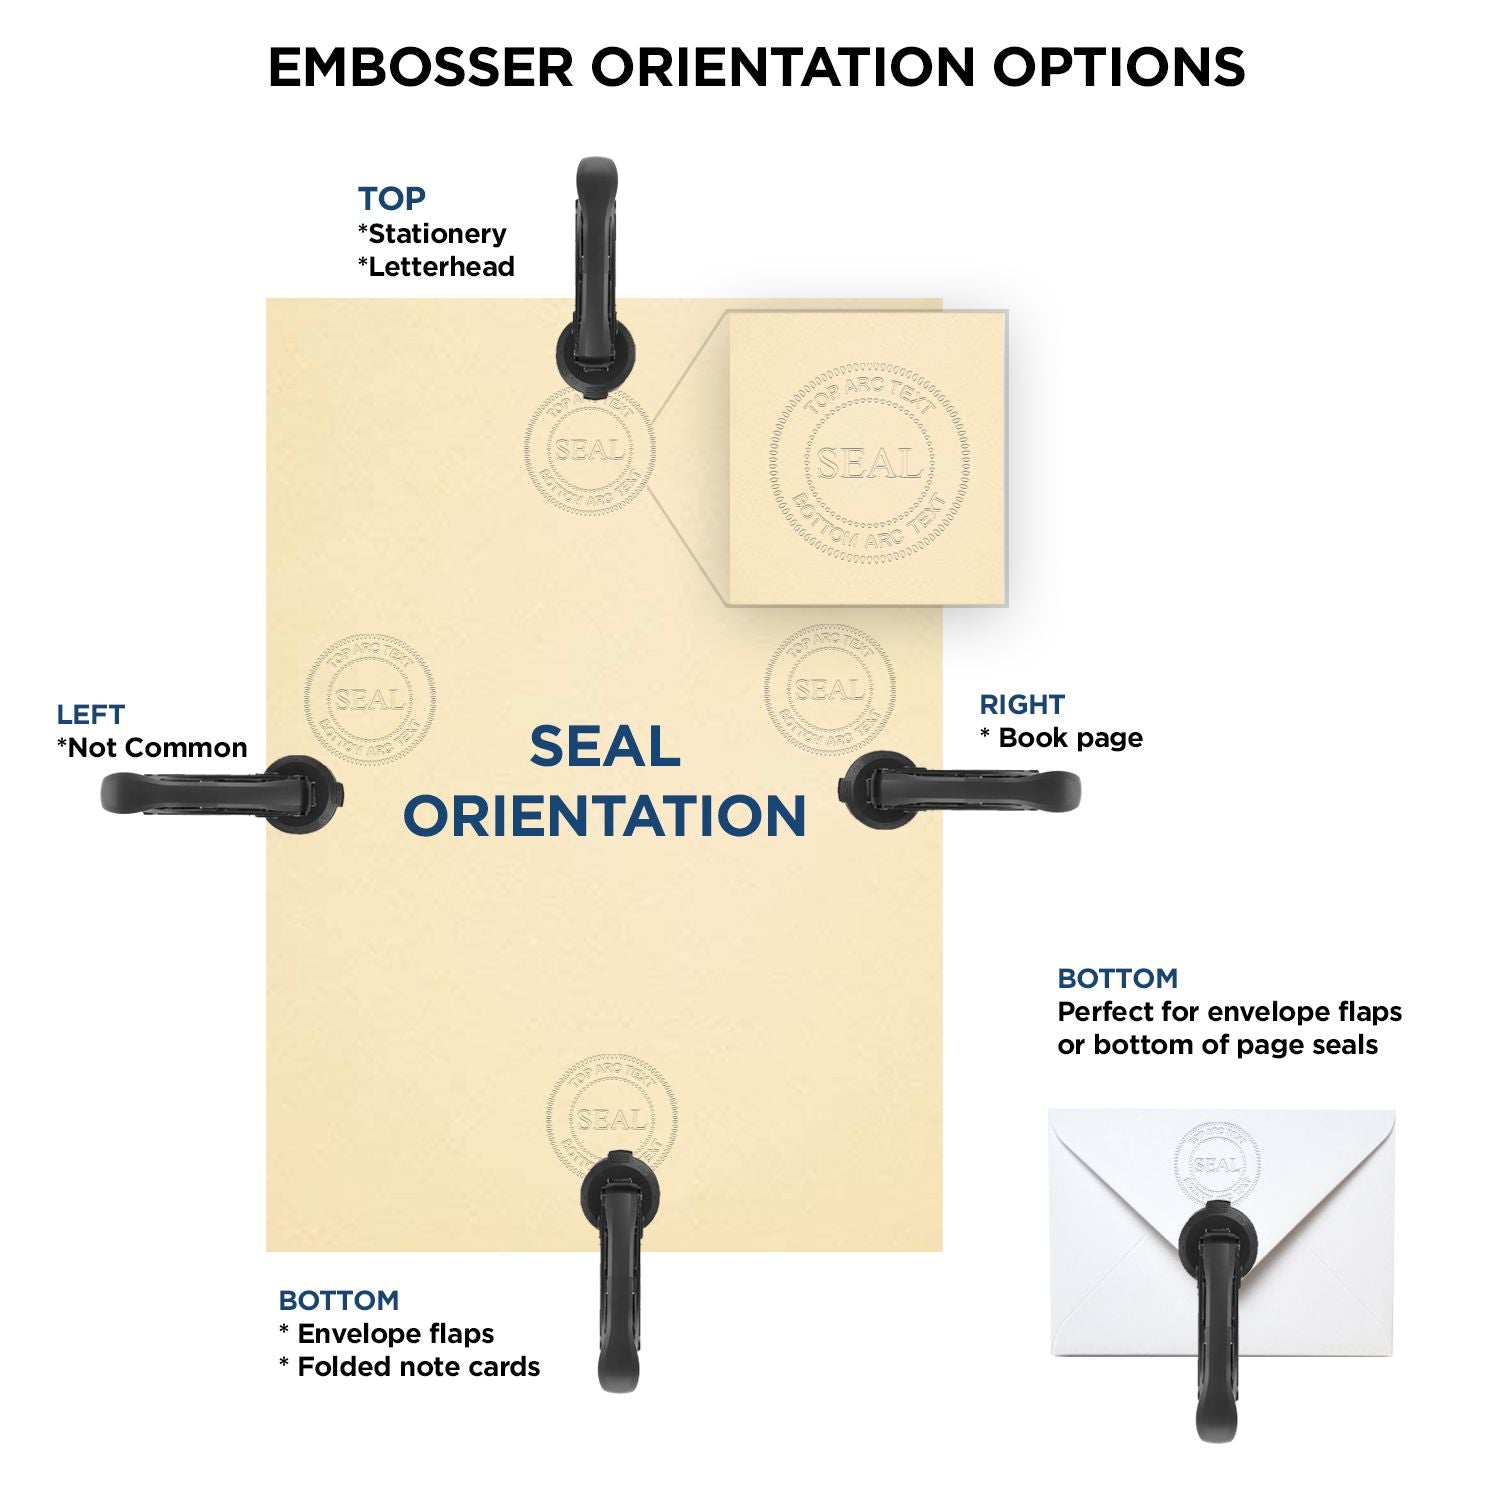 An infographic for the Gift South Dakota Landscape Architect Seal showing embosser orientation, this is showing examples of a top, bottom, right and left insert.